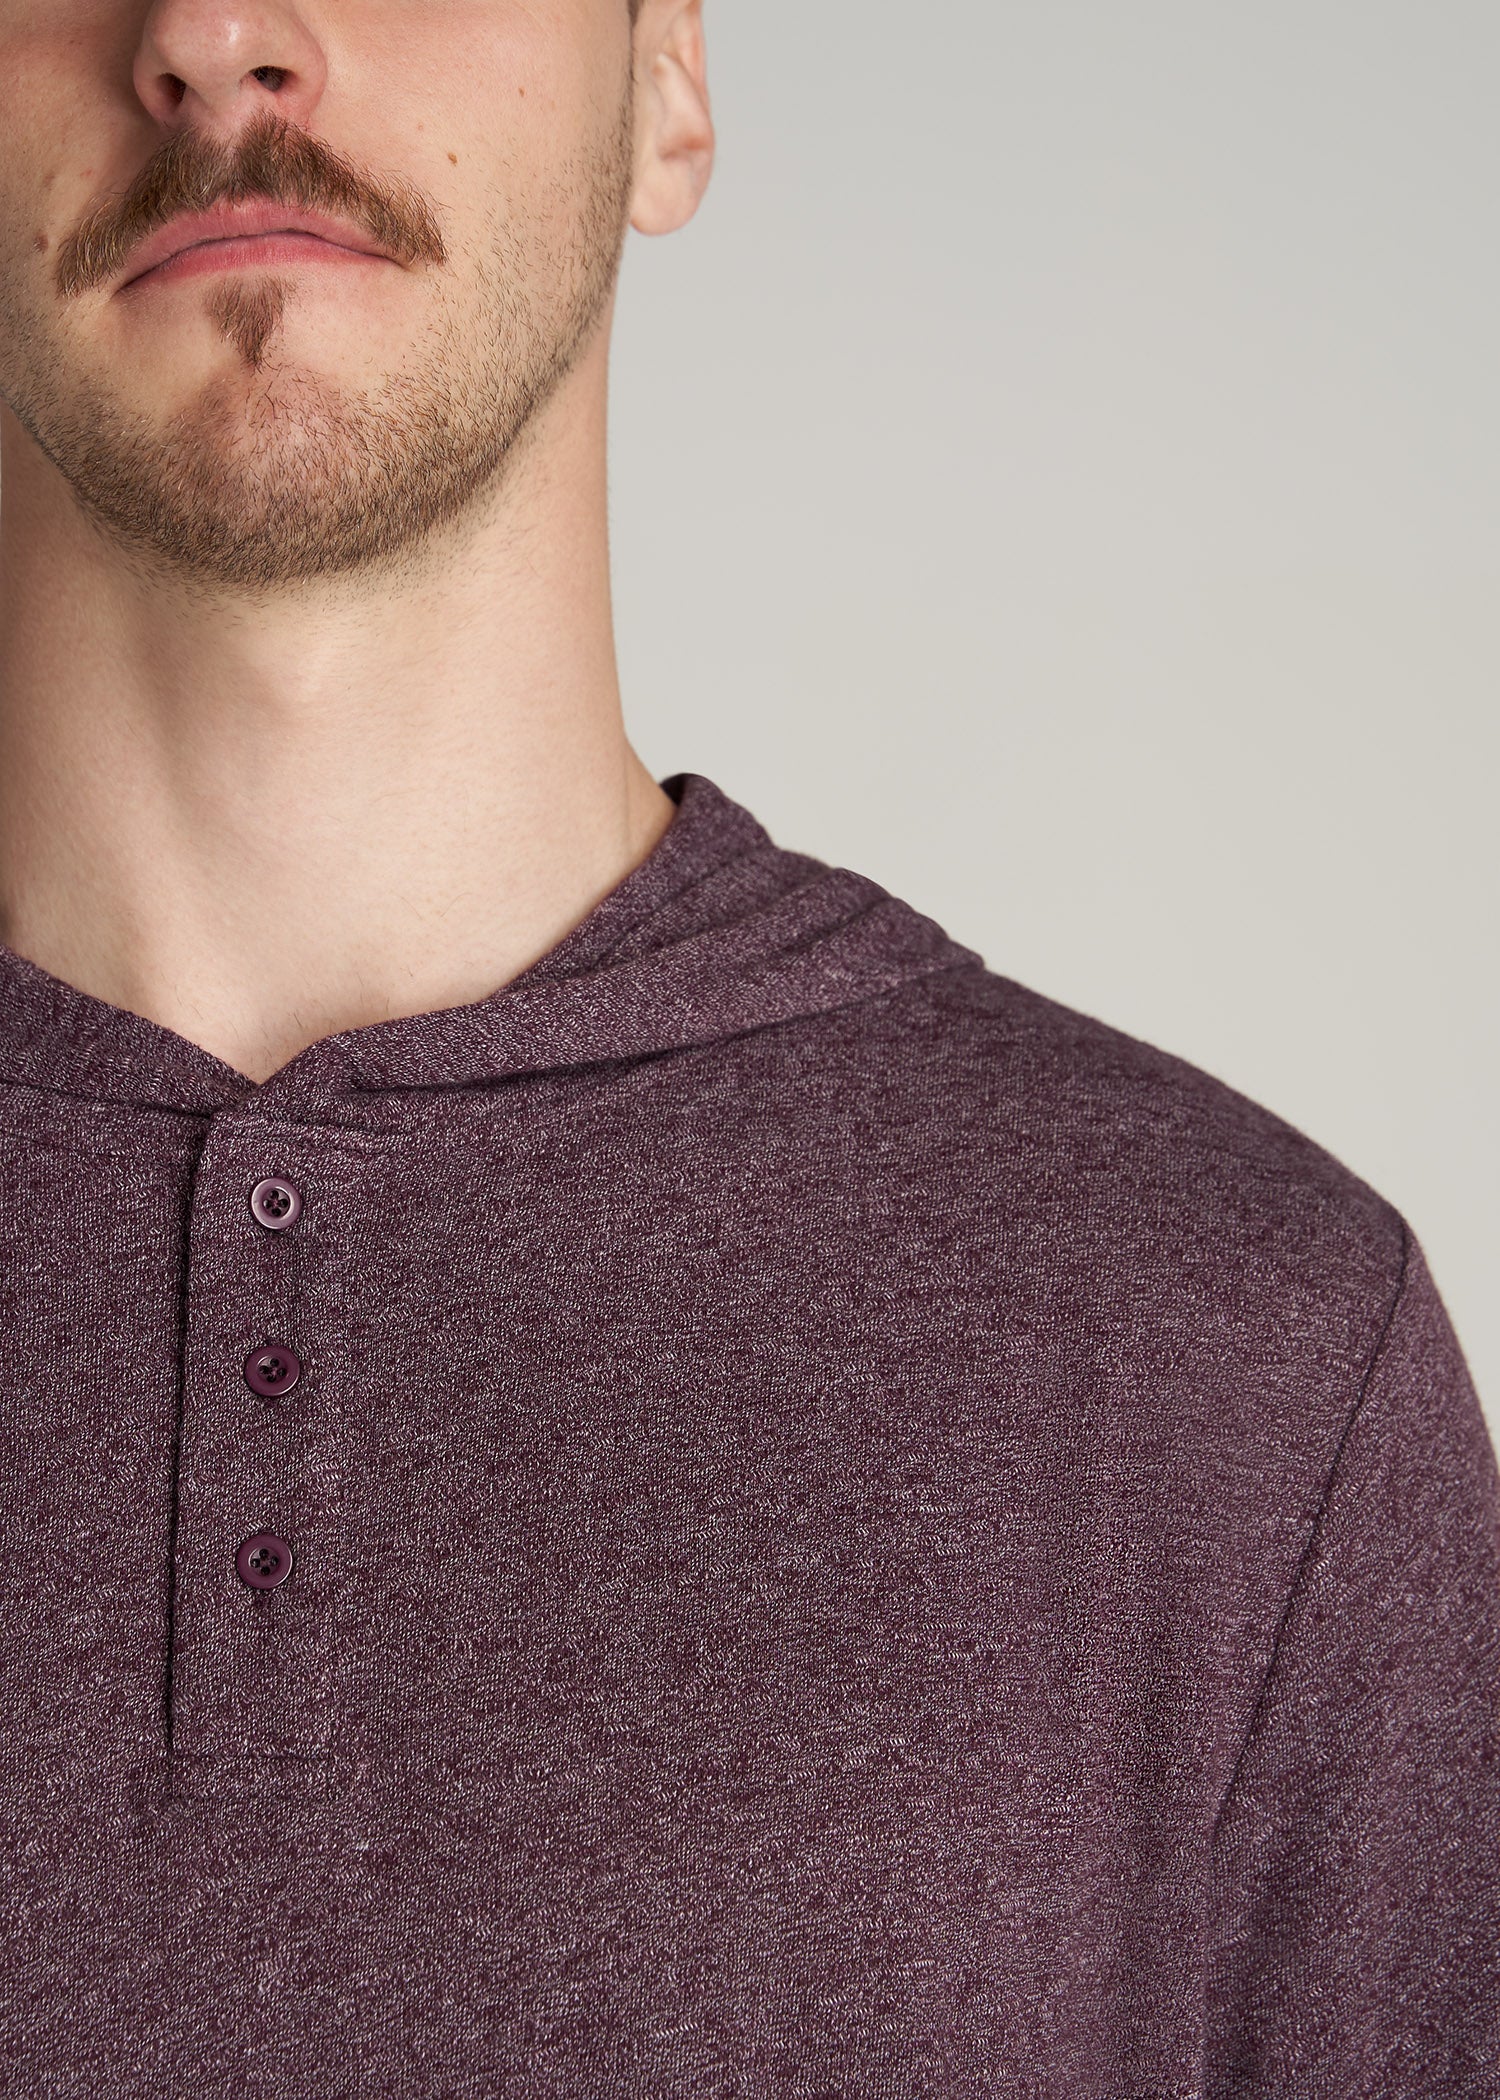 Henley Hoodie for Tall Men in Burgundy Mix M / Extra Tall / Burgundy Mix